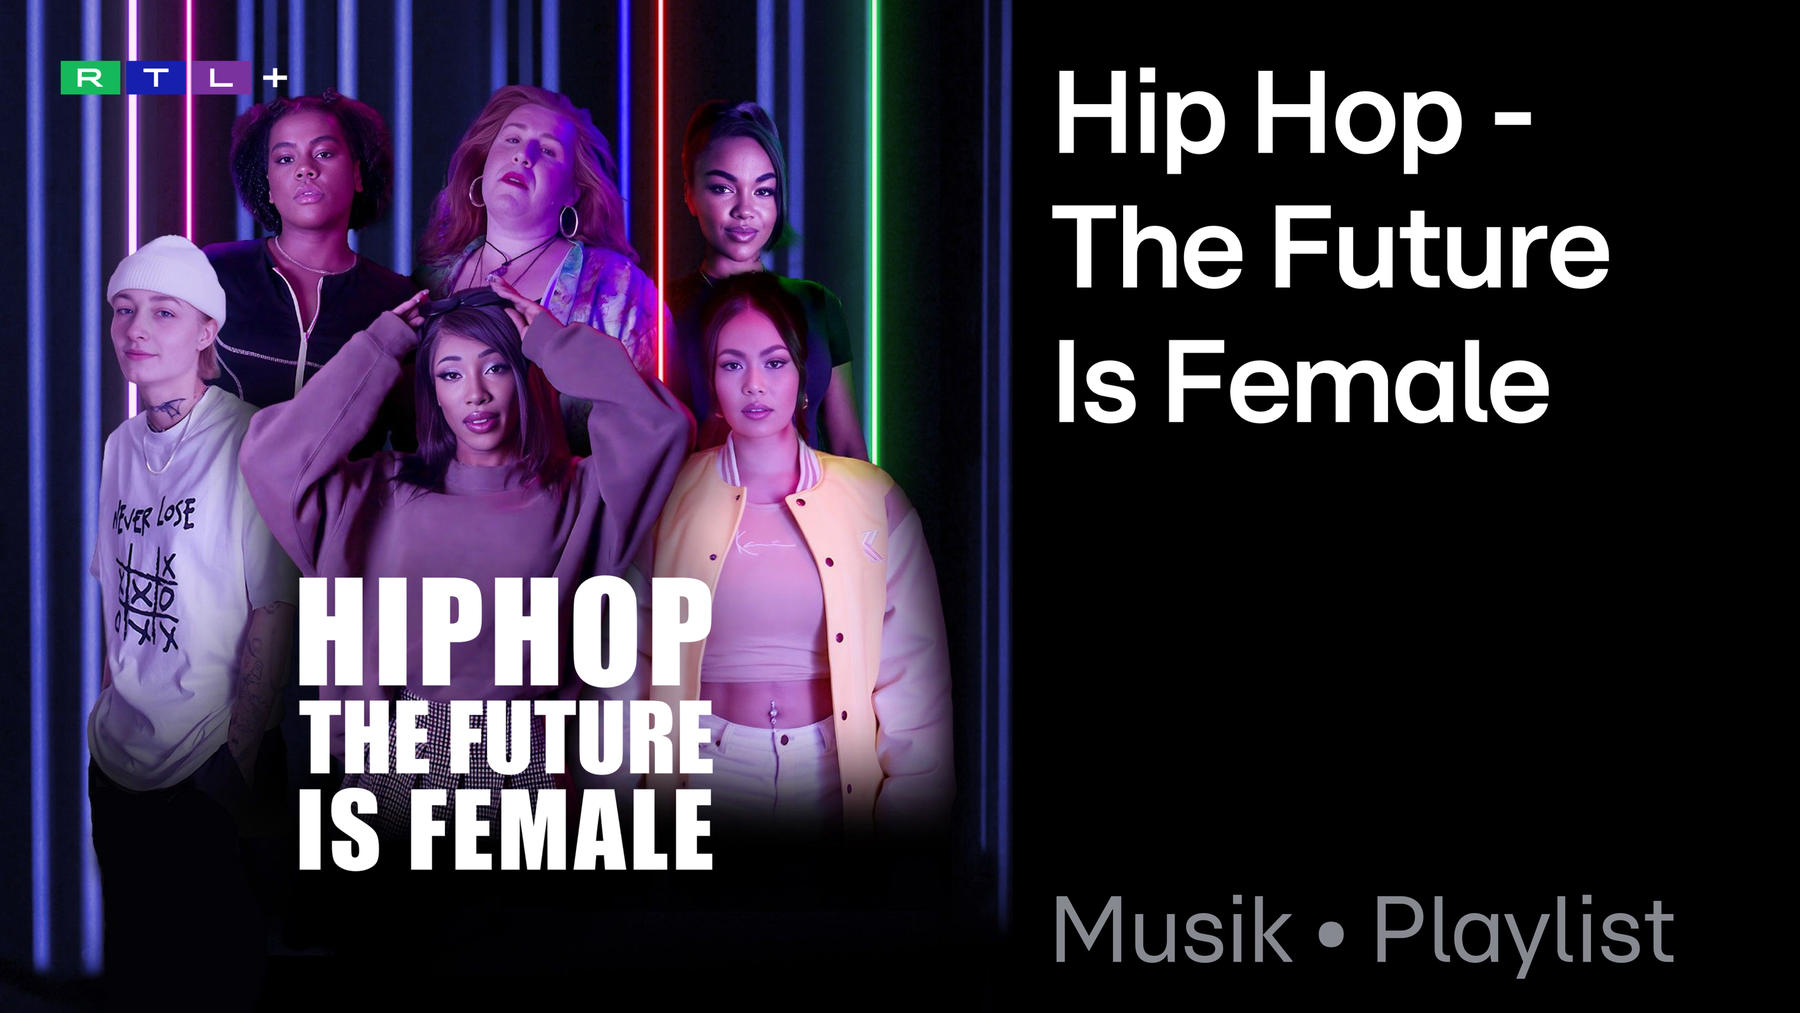 Playlist: The future is female